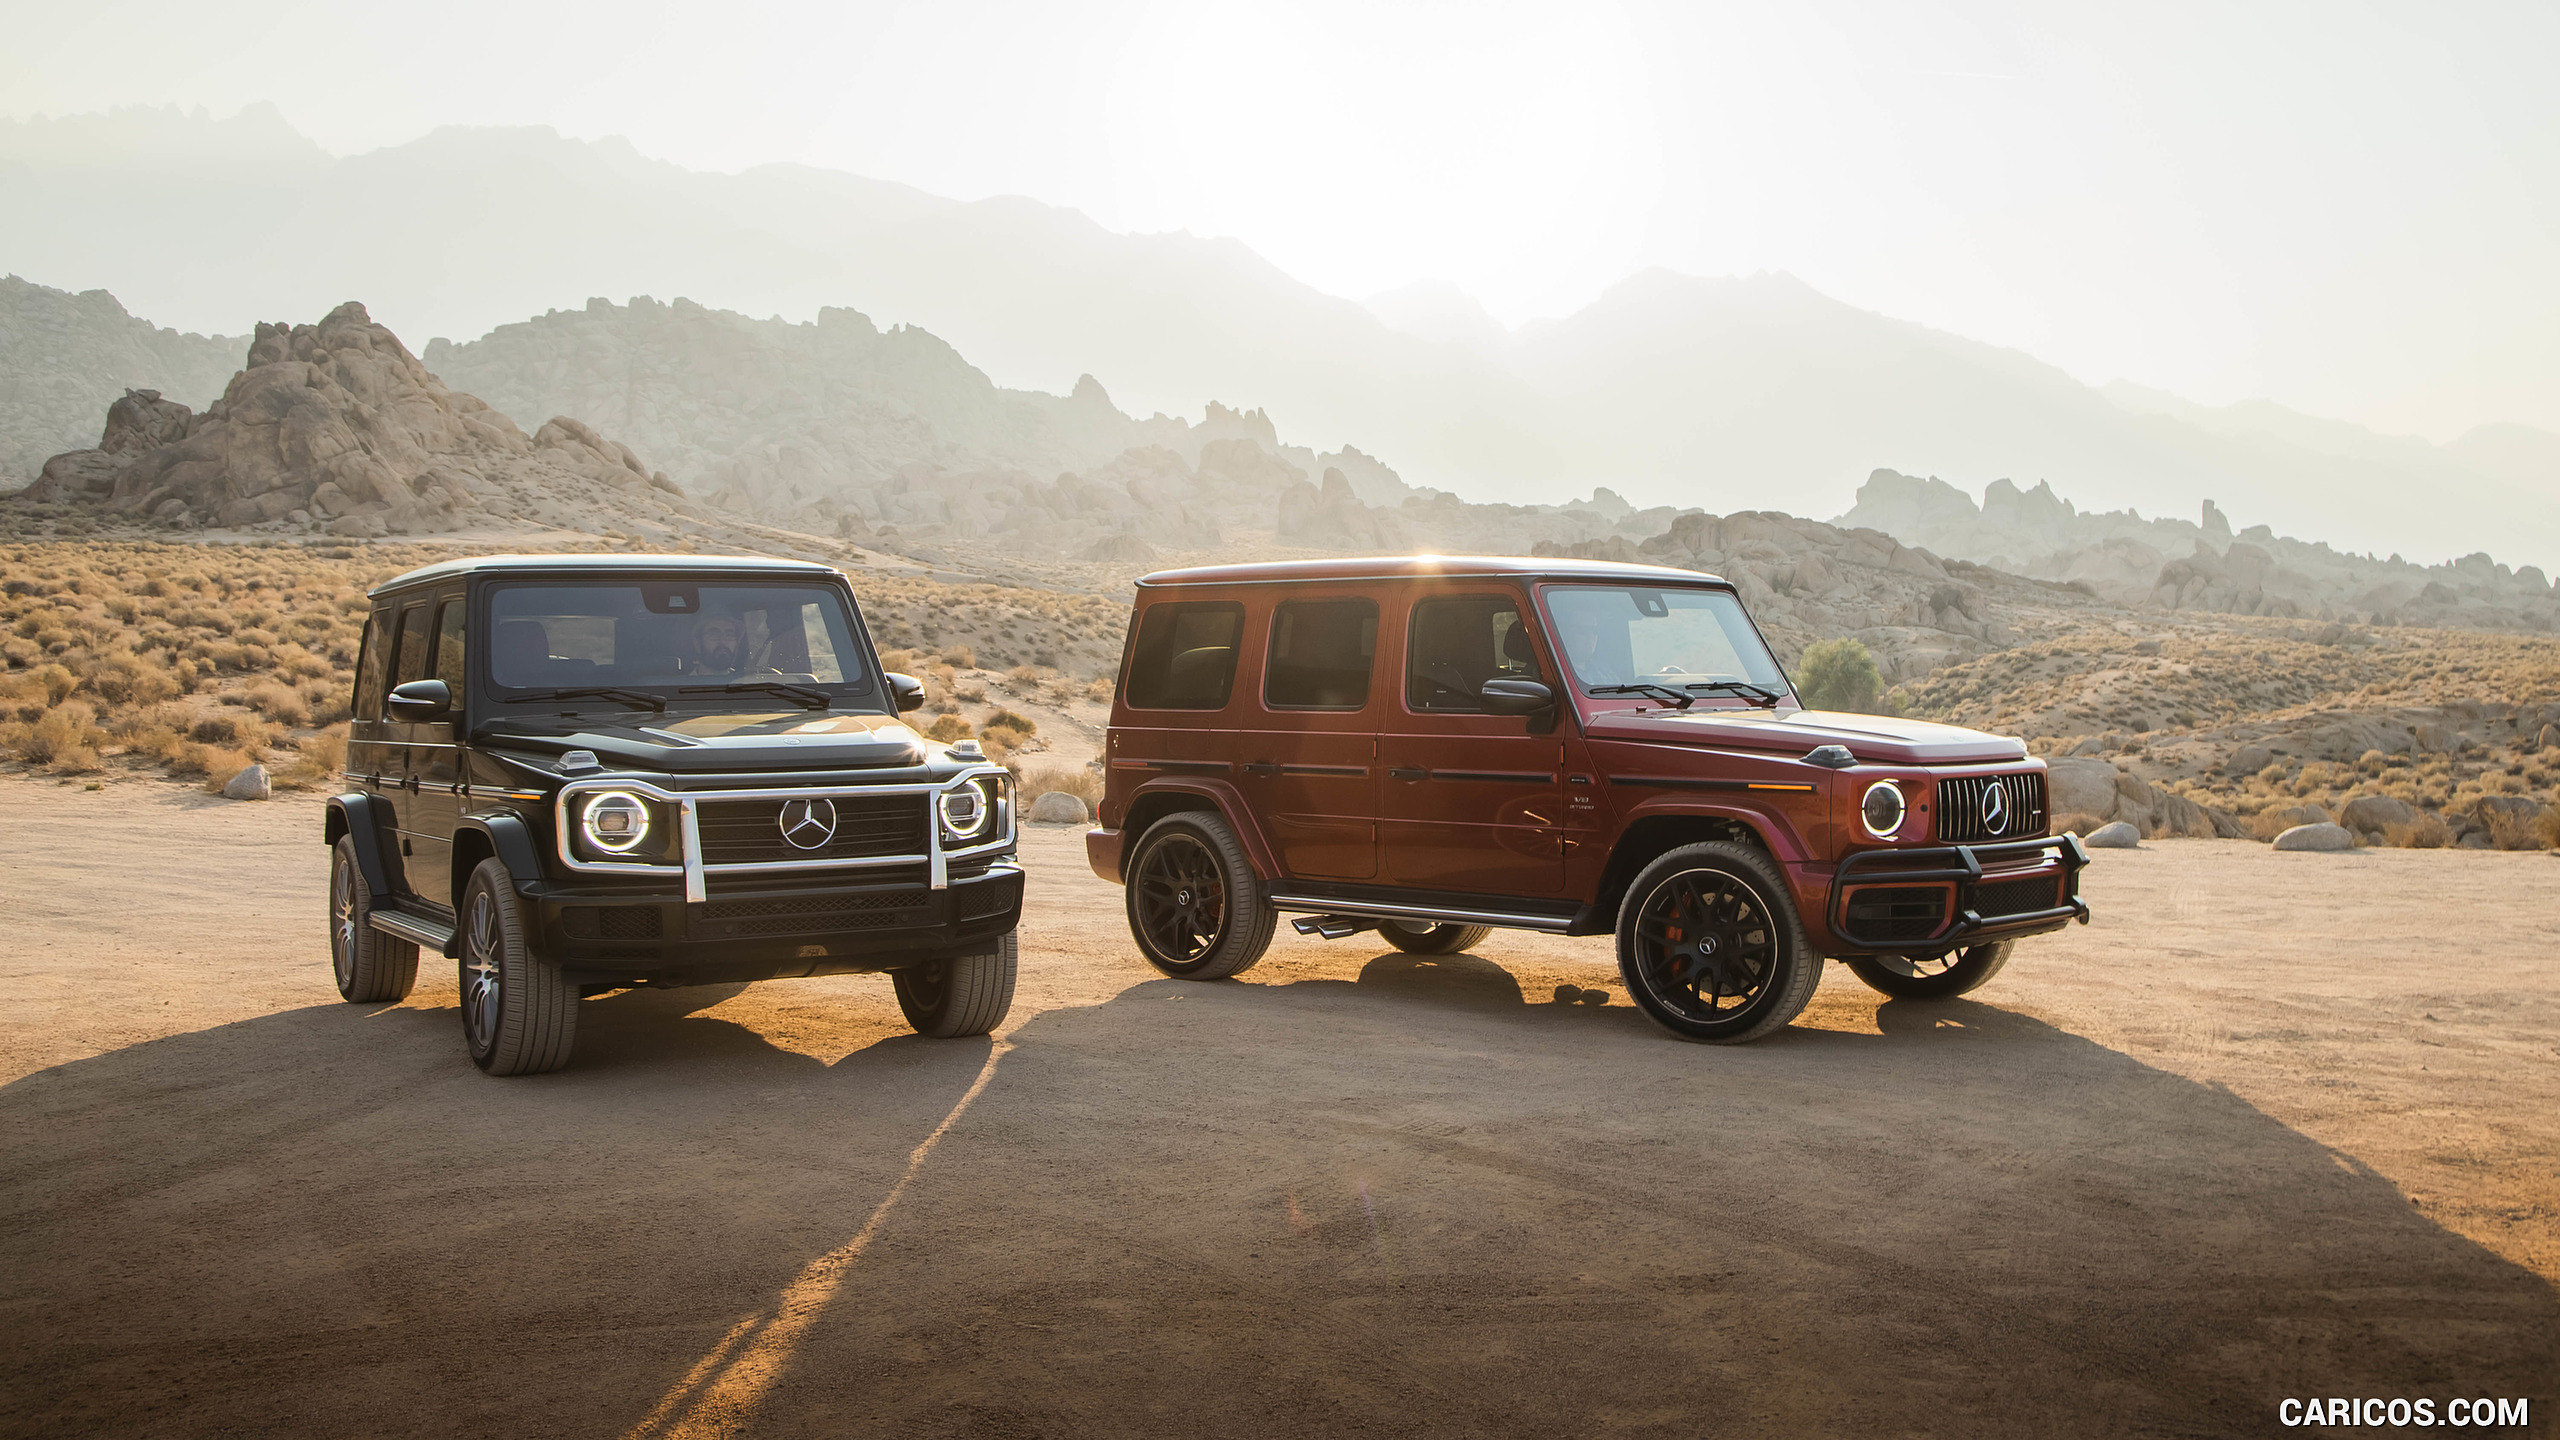 2019 Mercedes-AMG G63 (U.S.-Spec) and 2019 G550, #351 of 452